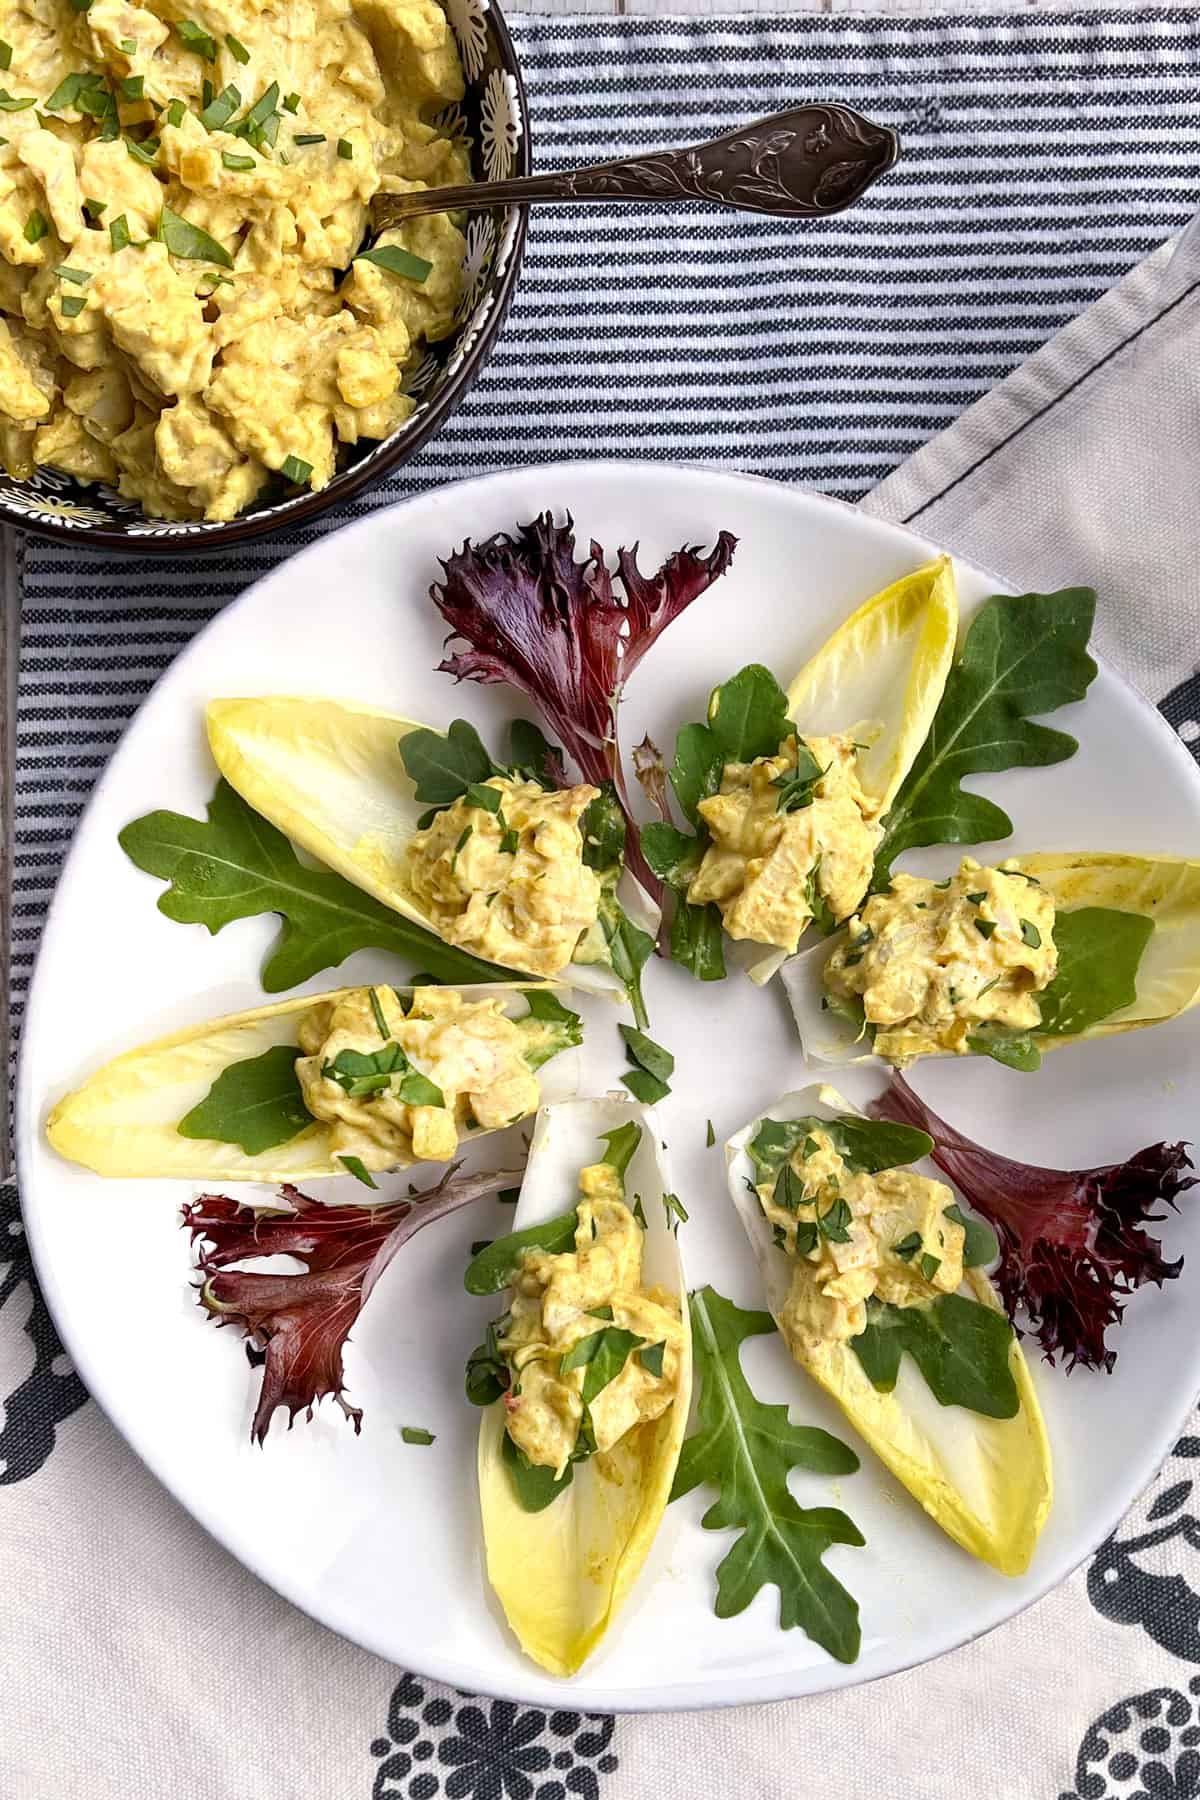 6 Endive spears on a round white platter, each topped with curried chicken salad and an endive leaf